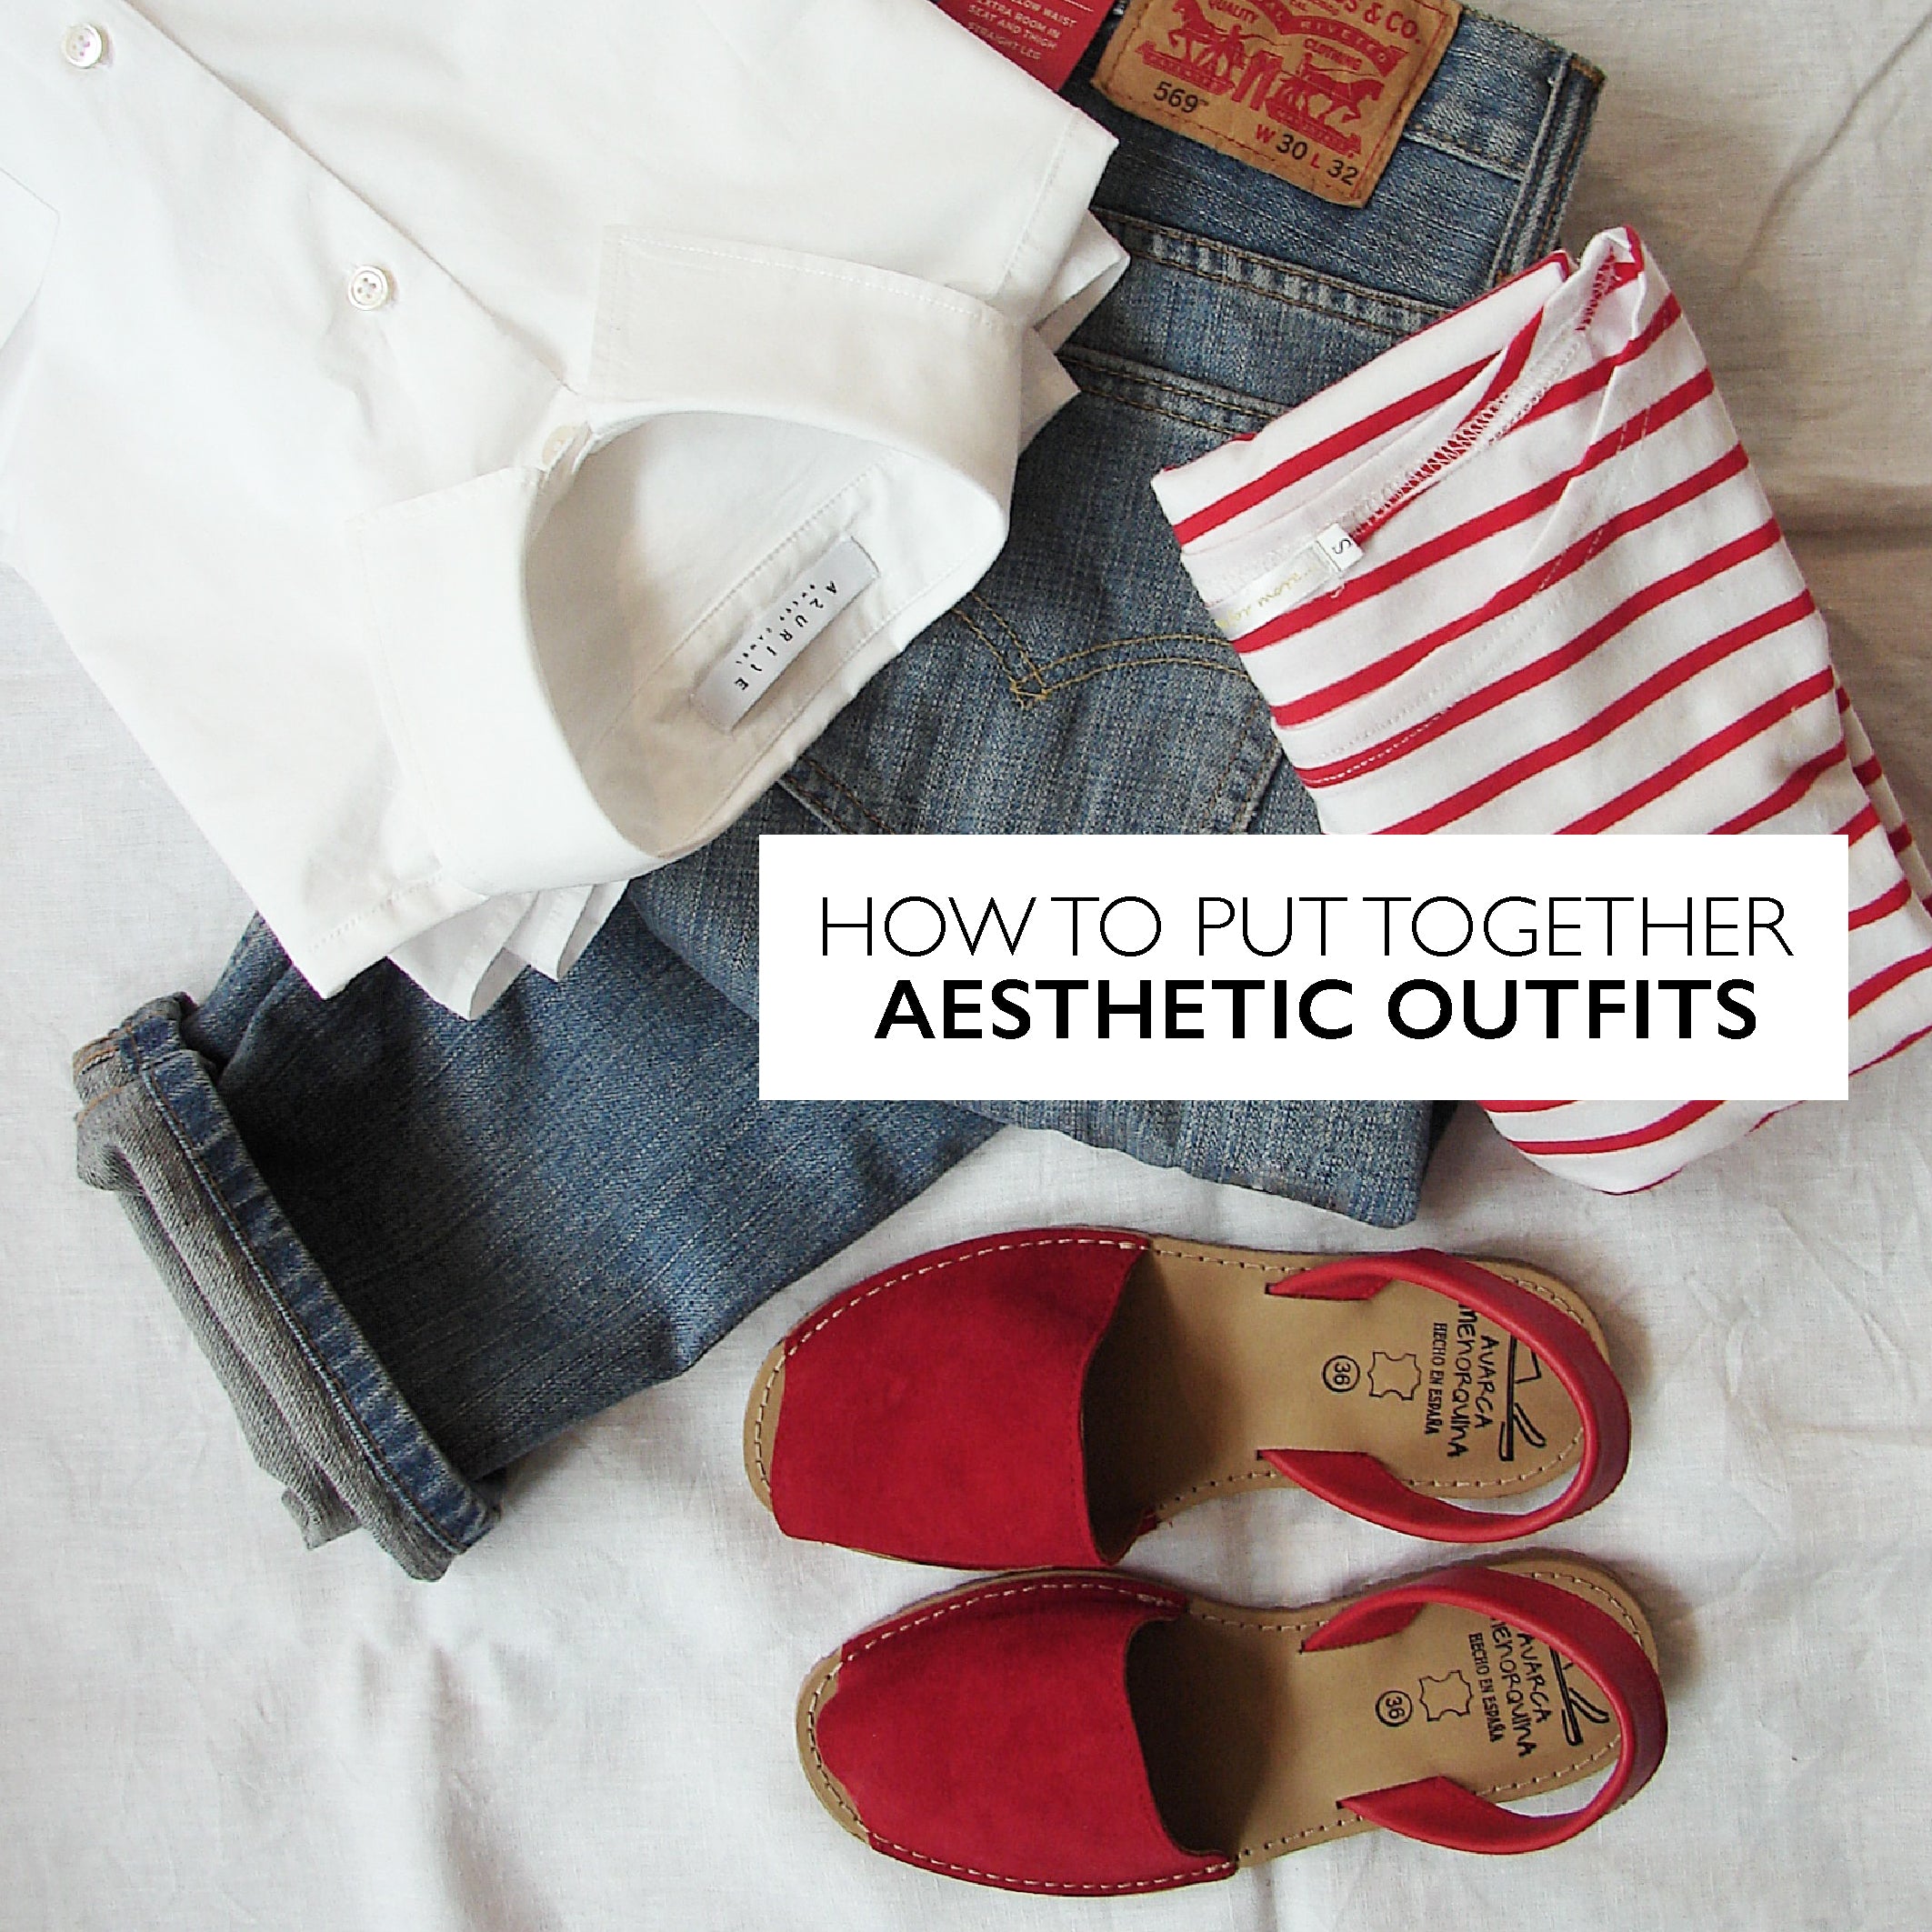 How to put together aesthetic outfits